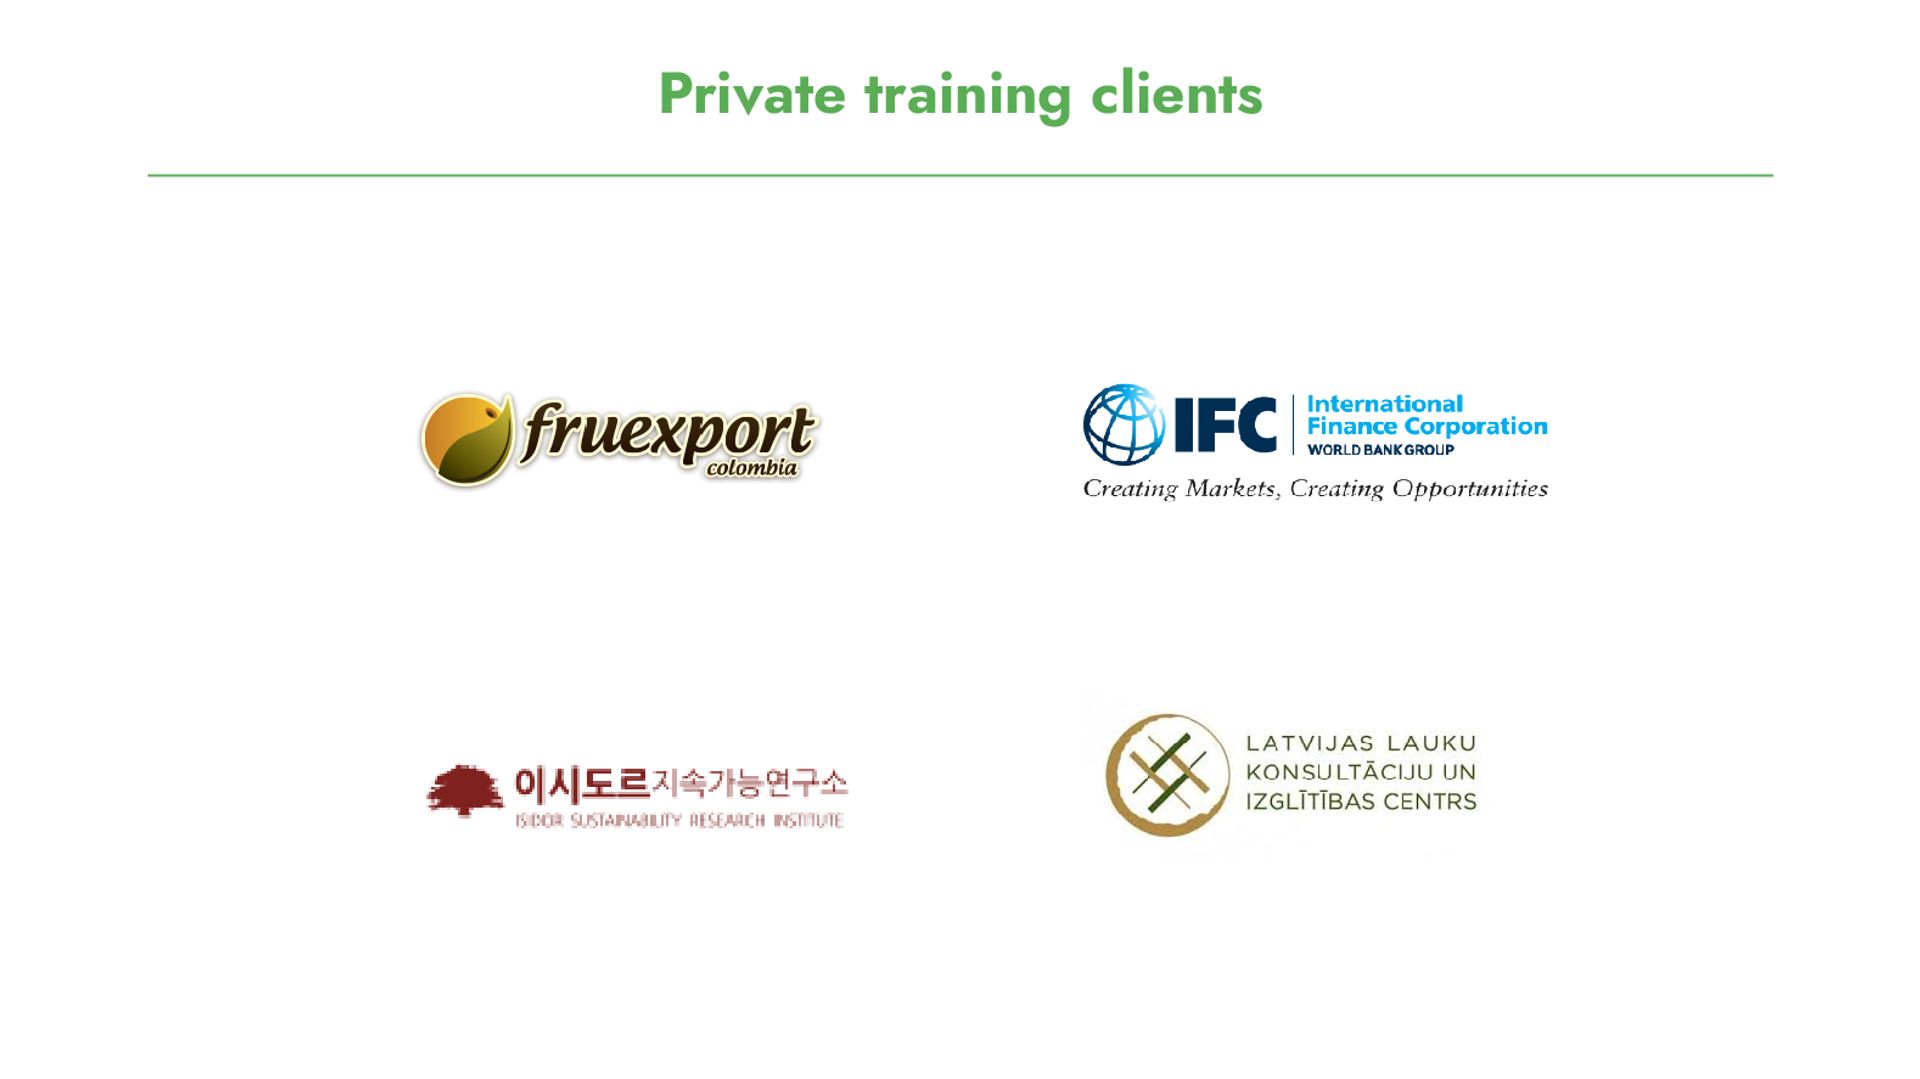 Infographic showing the company logos of satisfied private training clients